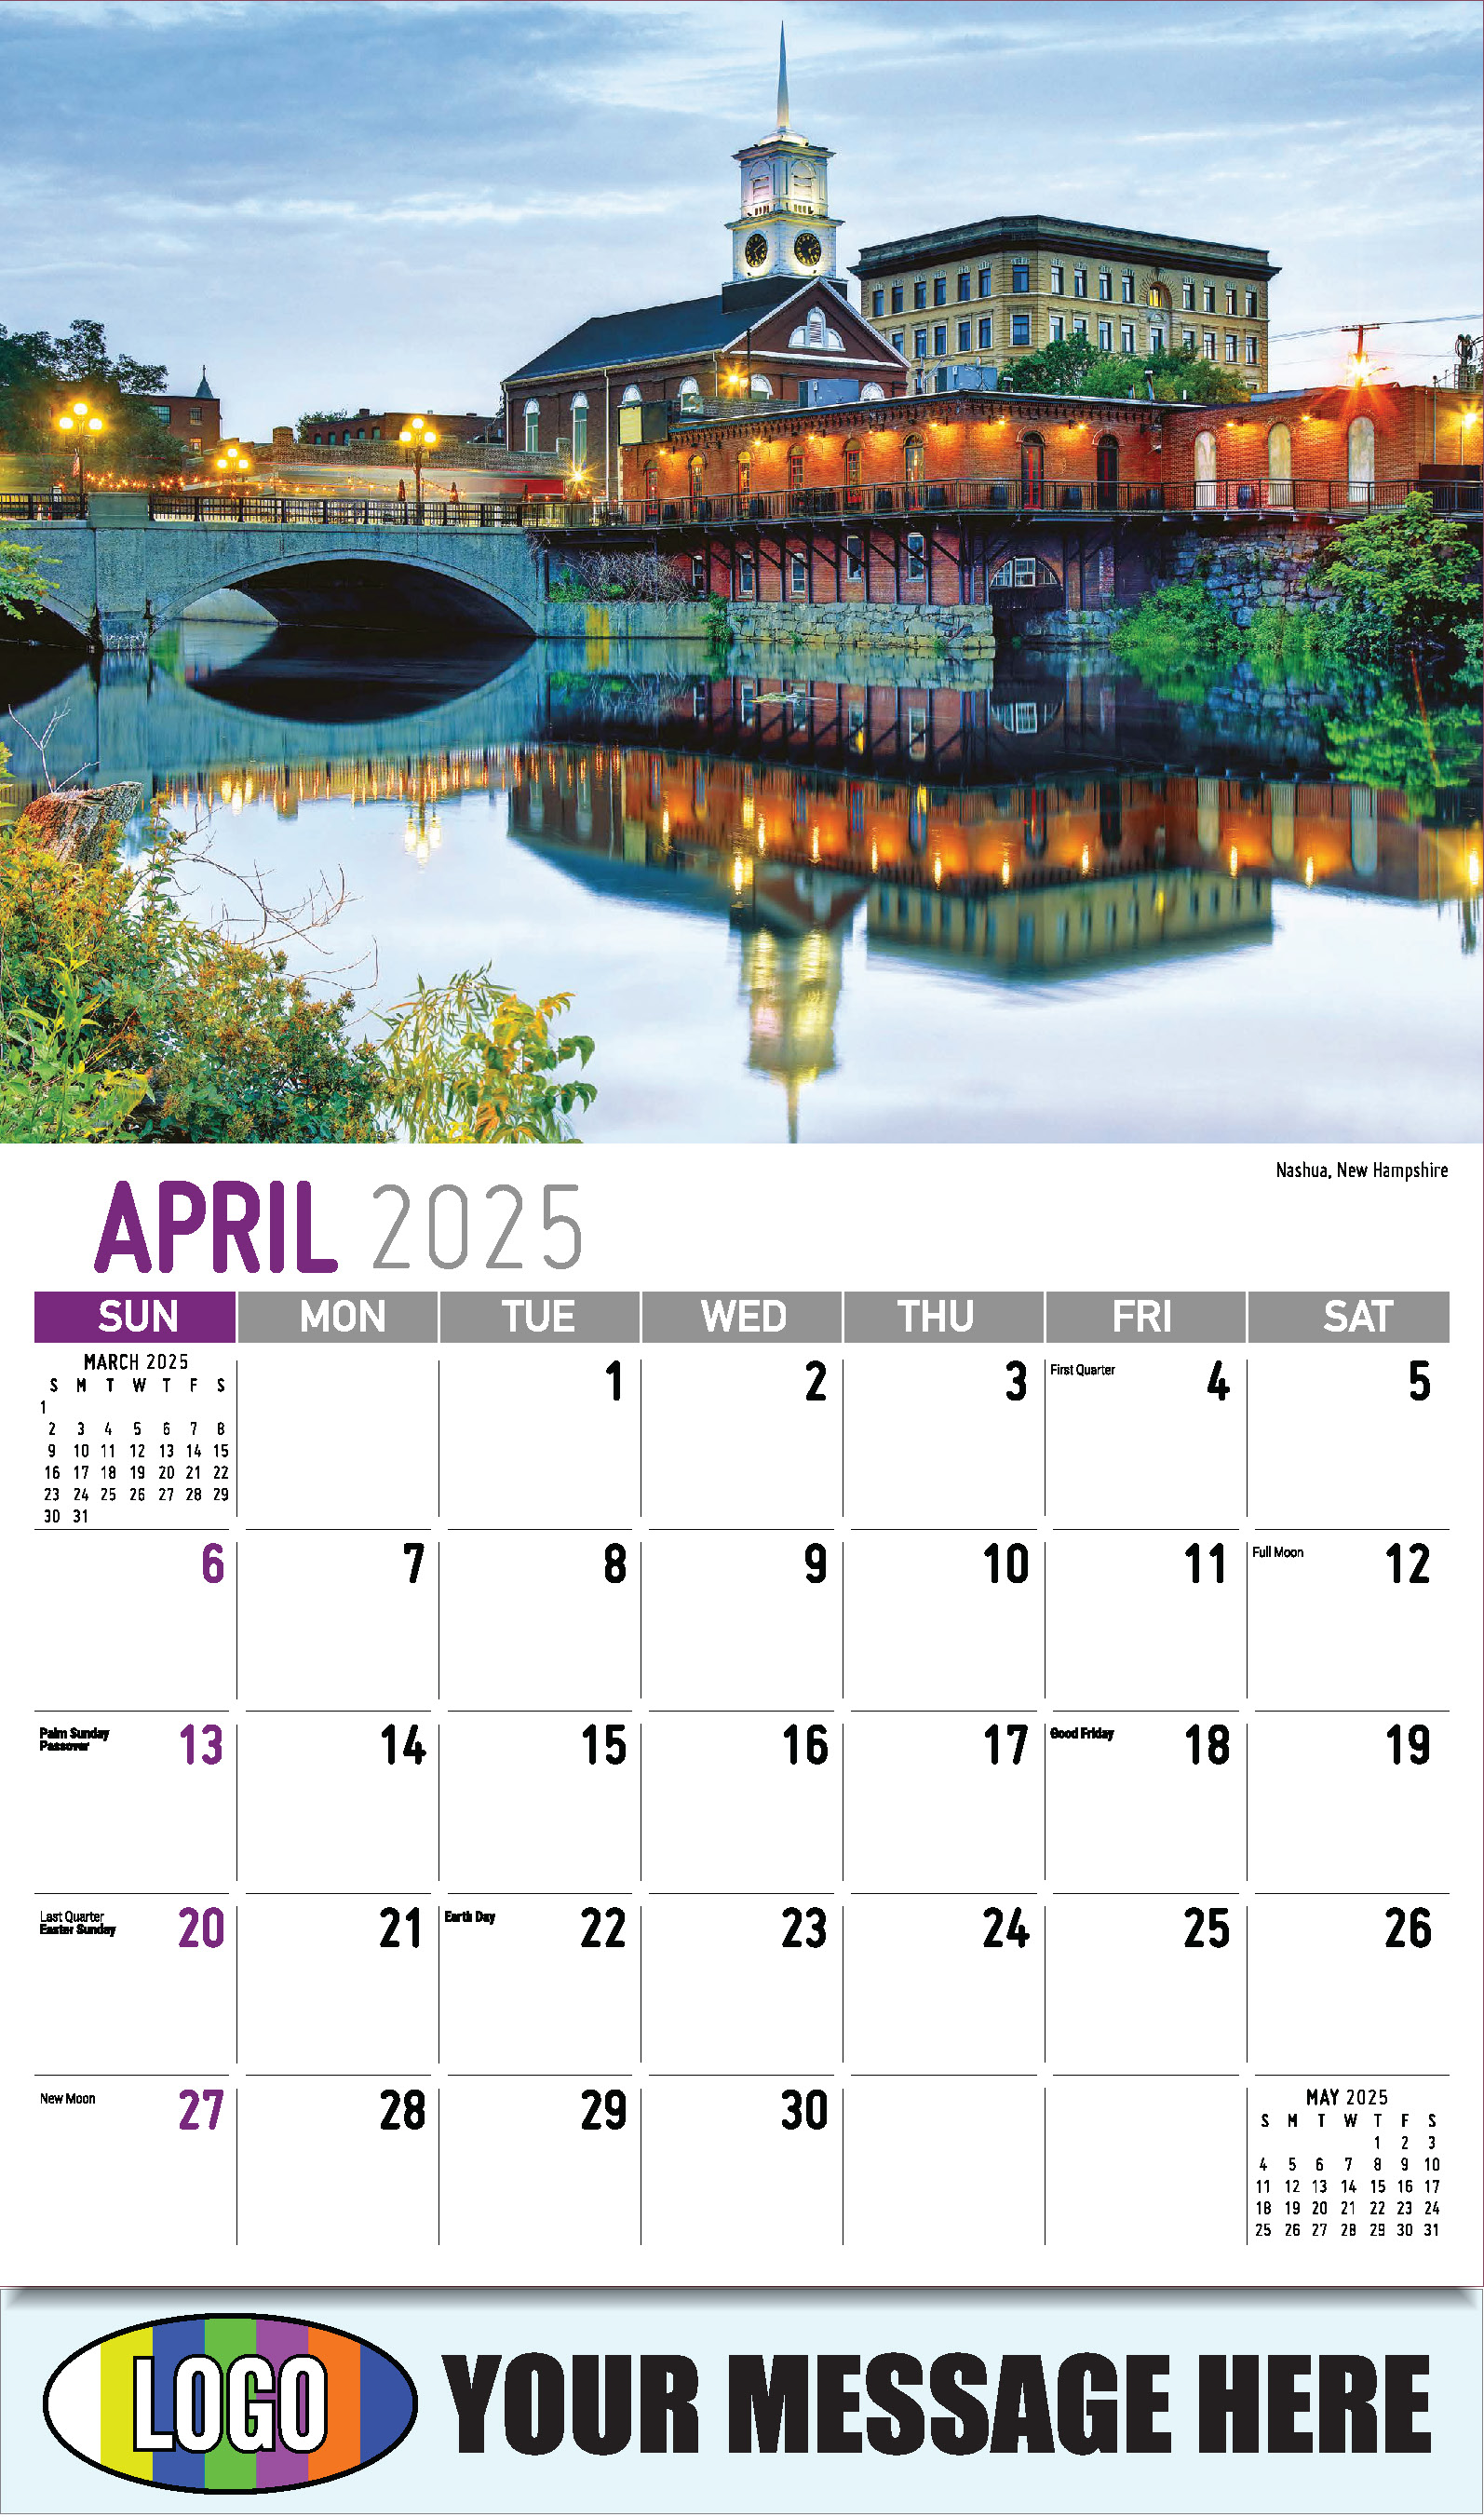 Scenes of New England 2025 Business Advertising Wall Calendar - April